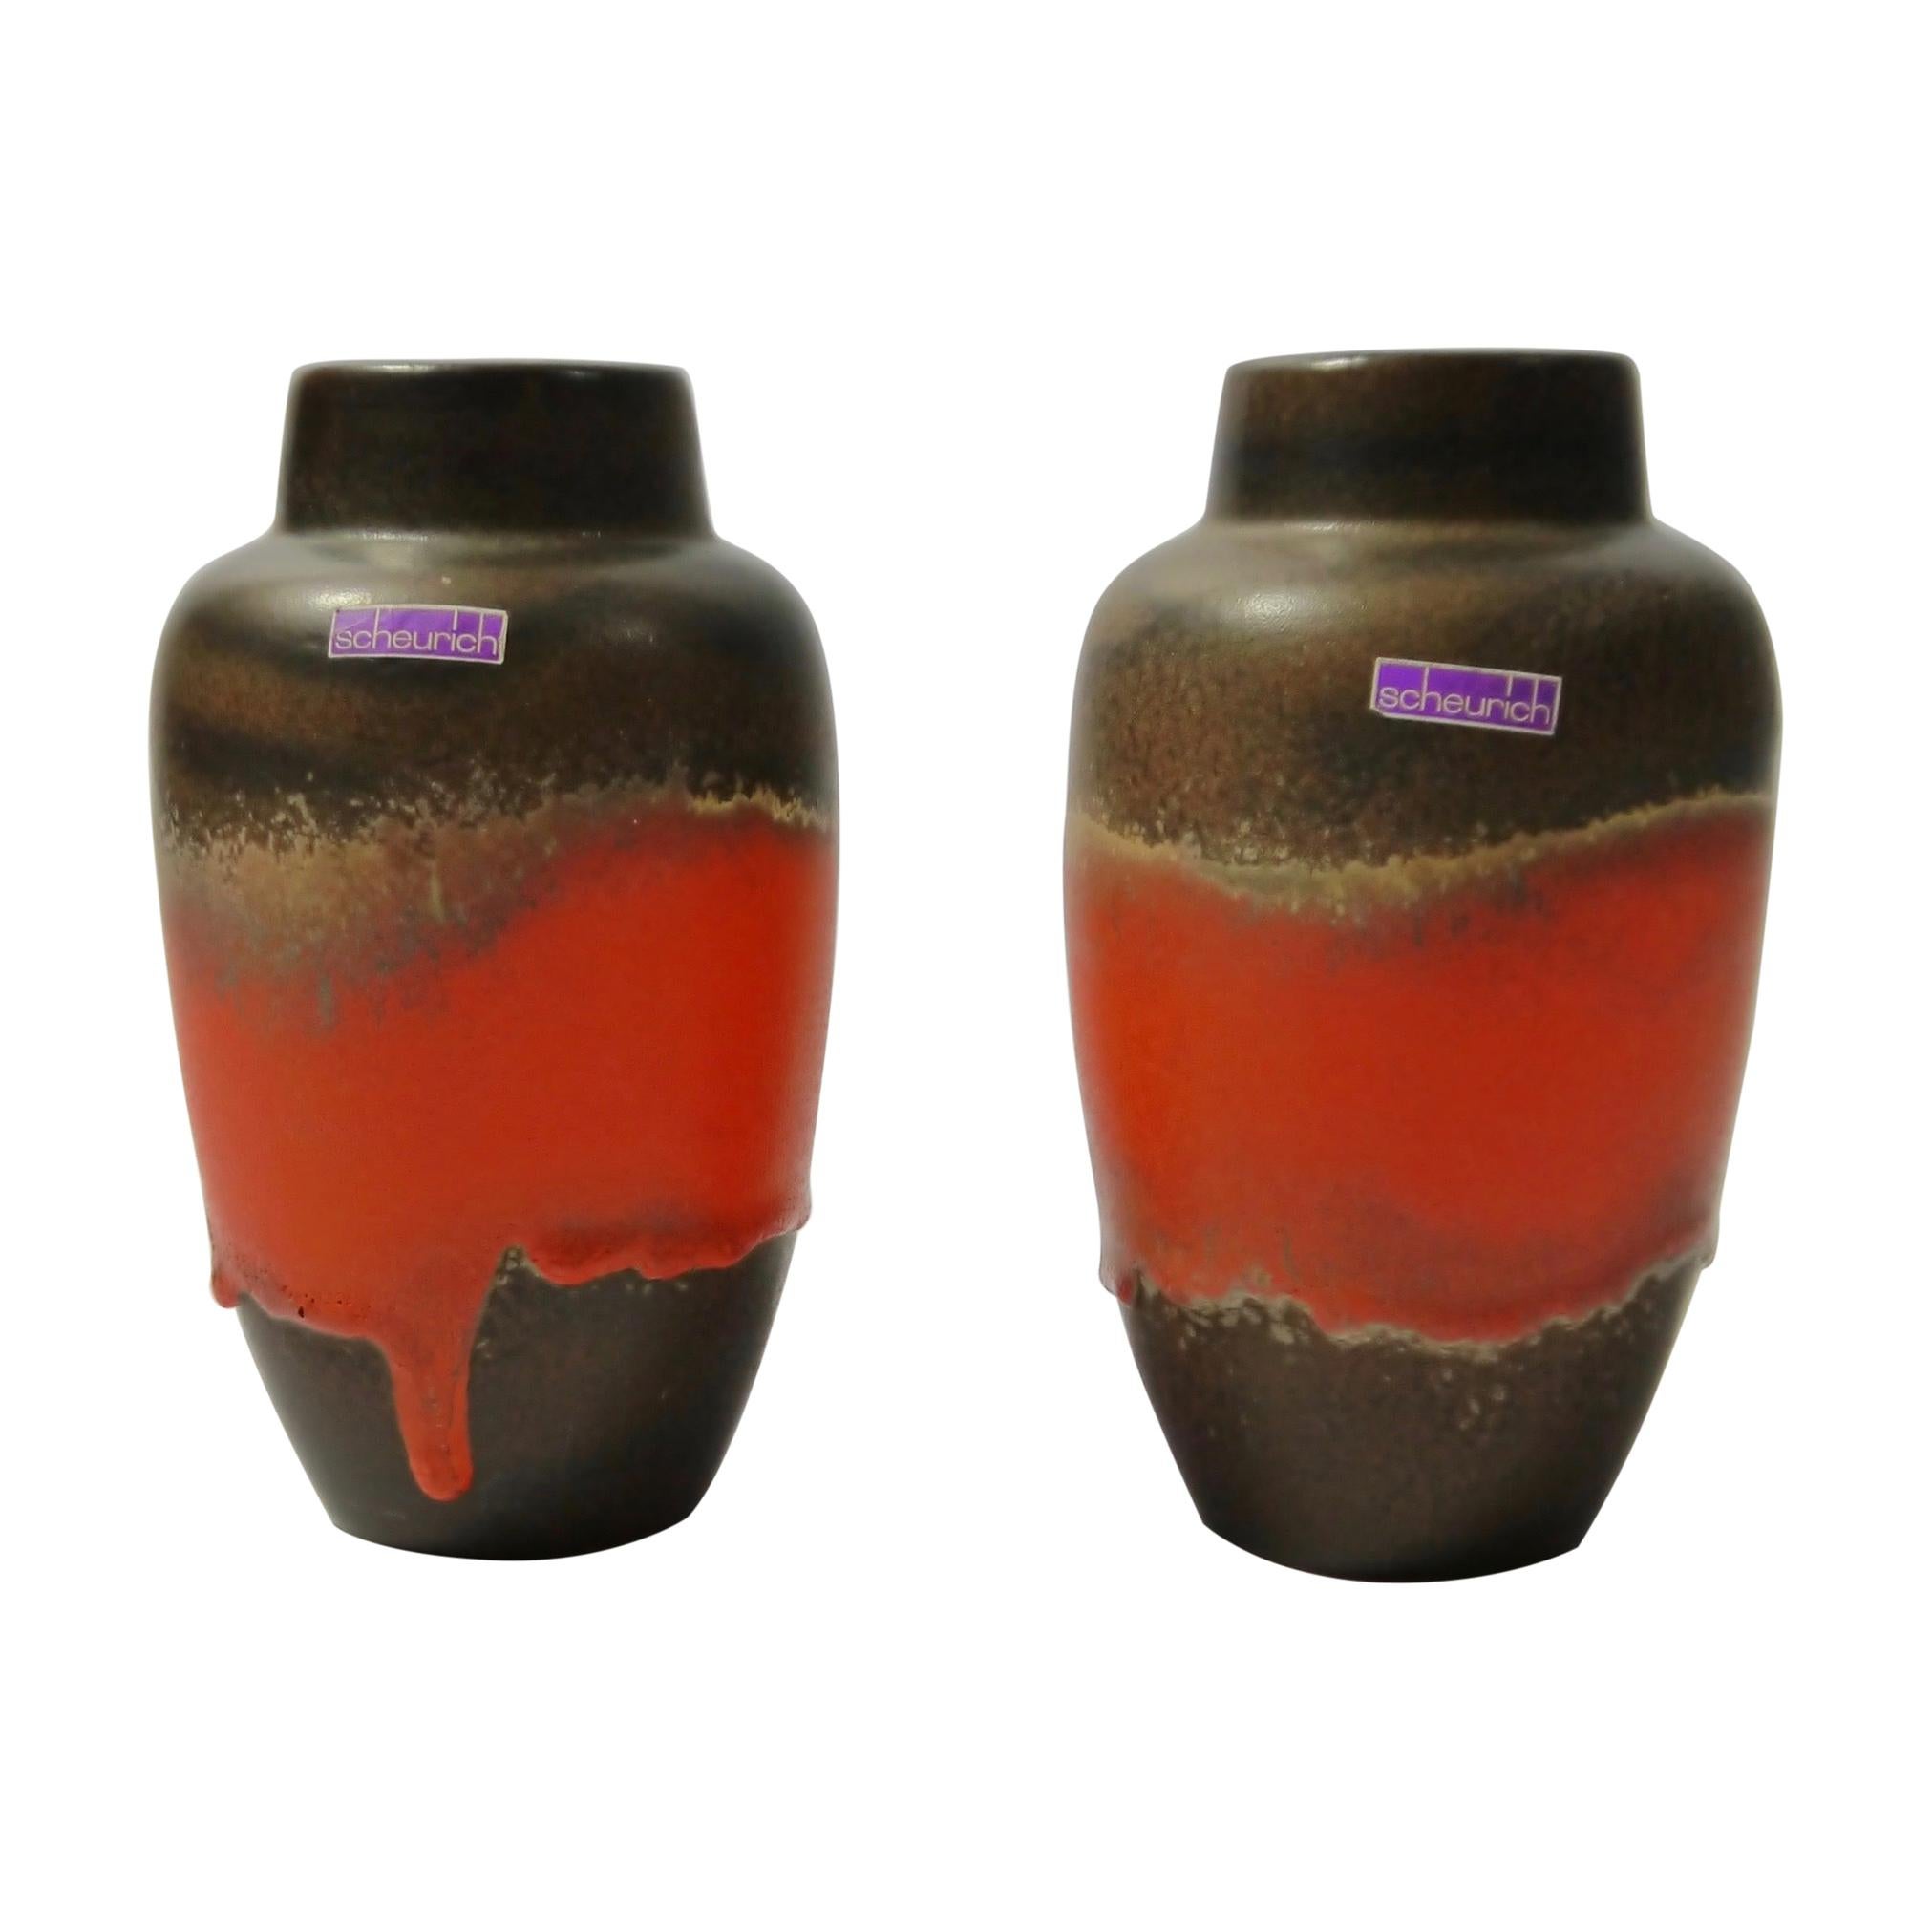 Pair of Fat Lava Ceramic Vases by Scheurich, West Germany, 1960s